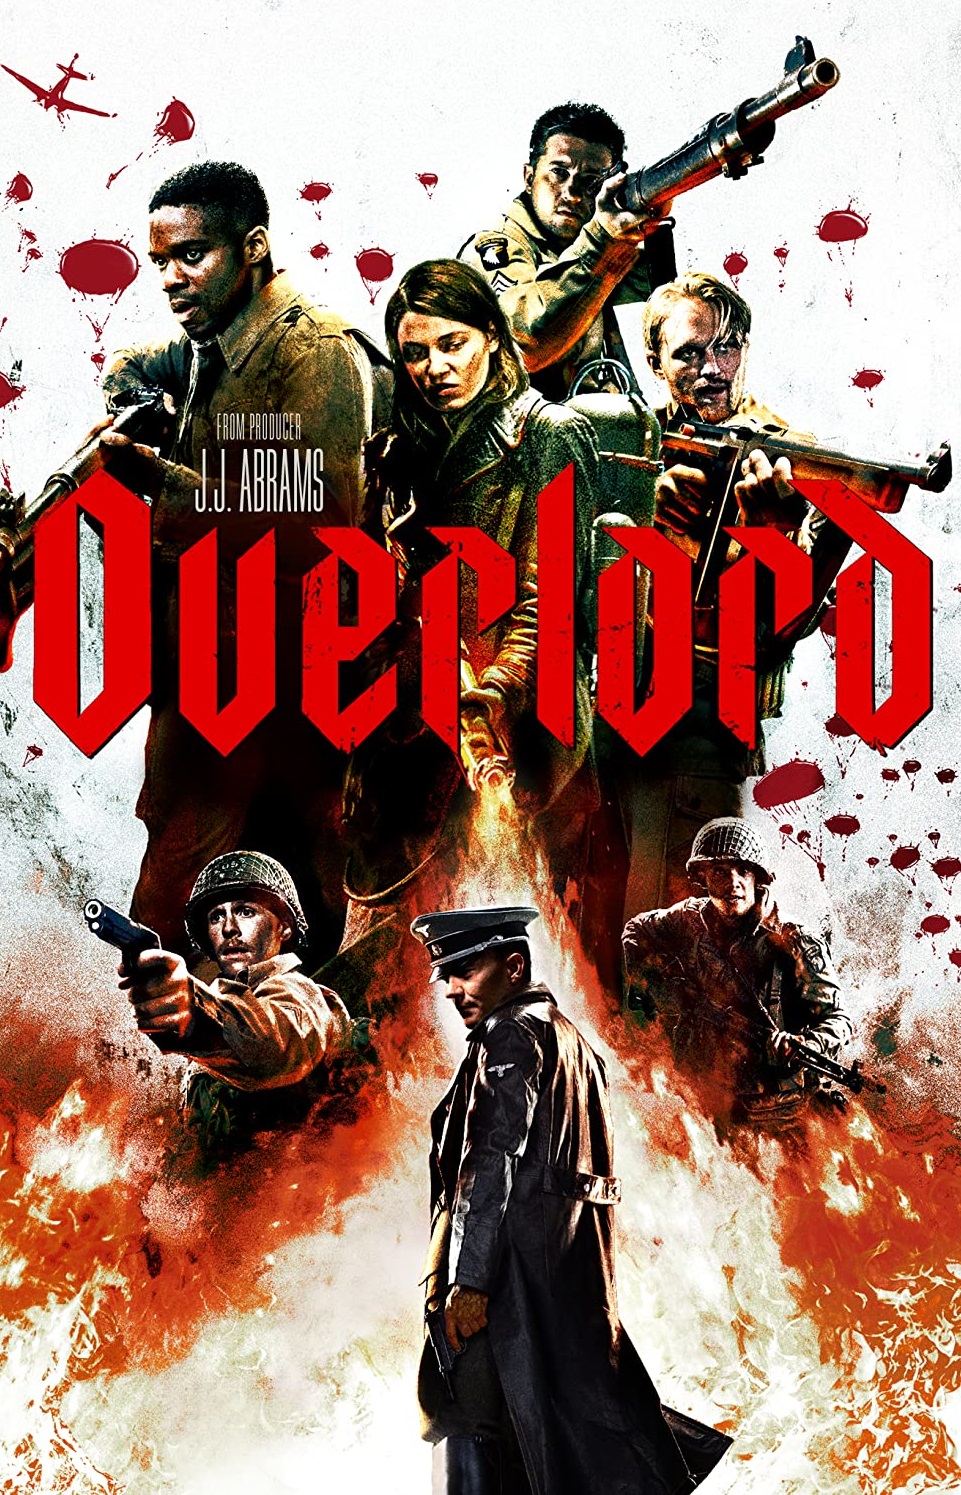 Overlord 2018 Tamil Dubbed Horror Movie Online